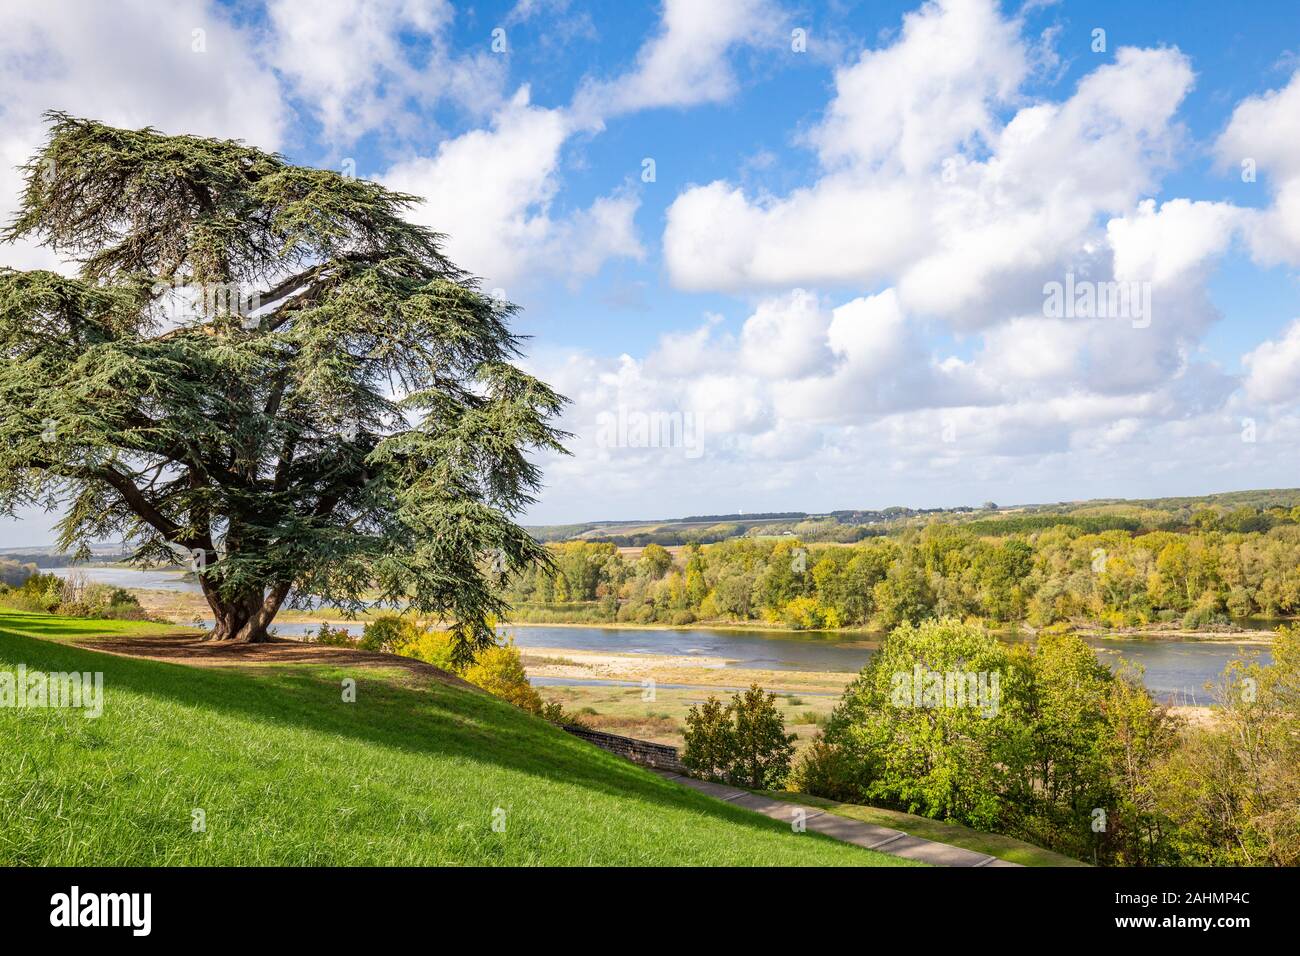 Scenic view of the Loire valley and river in autumn colors from the beautiful park surrounding Chaumont-sur-Loire castle France Stock Photo